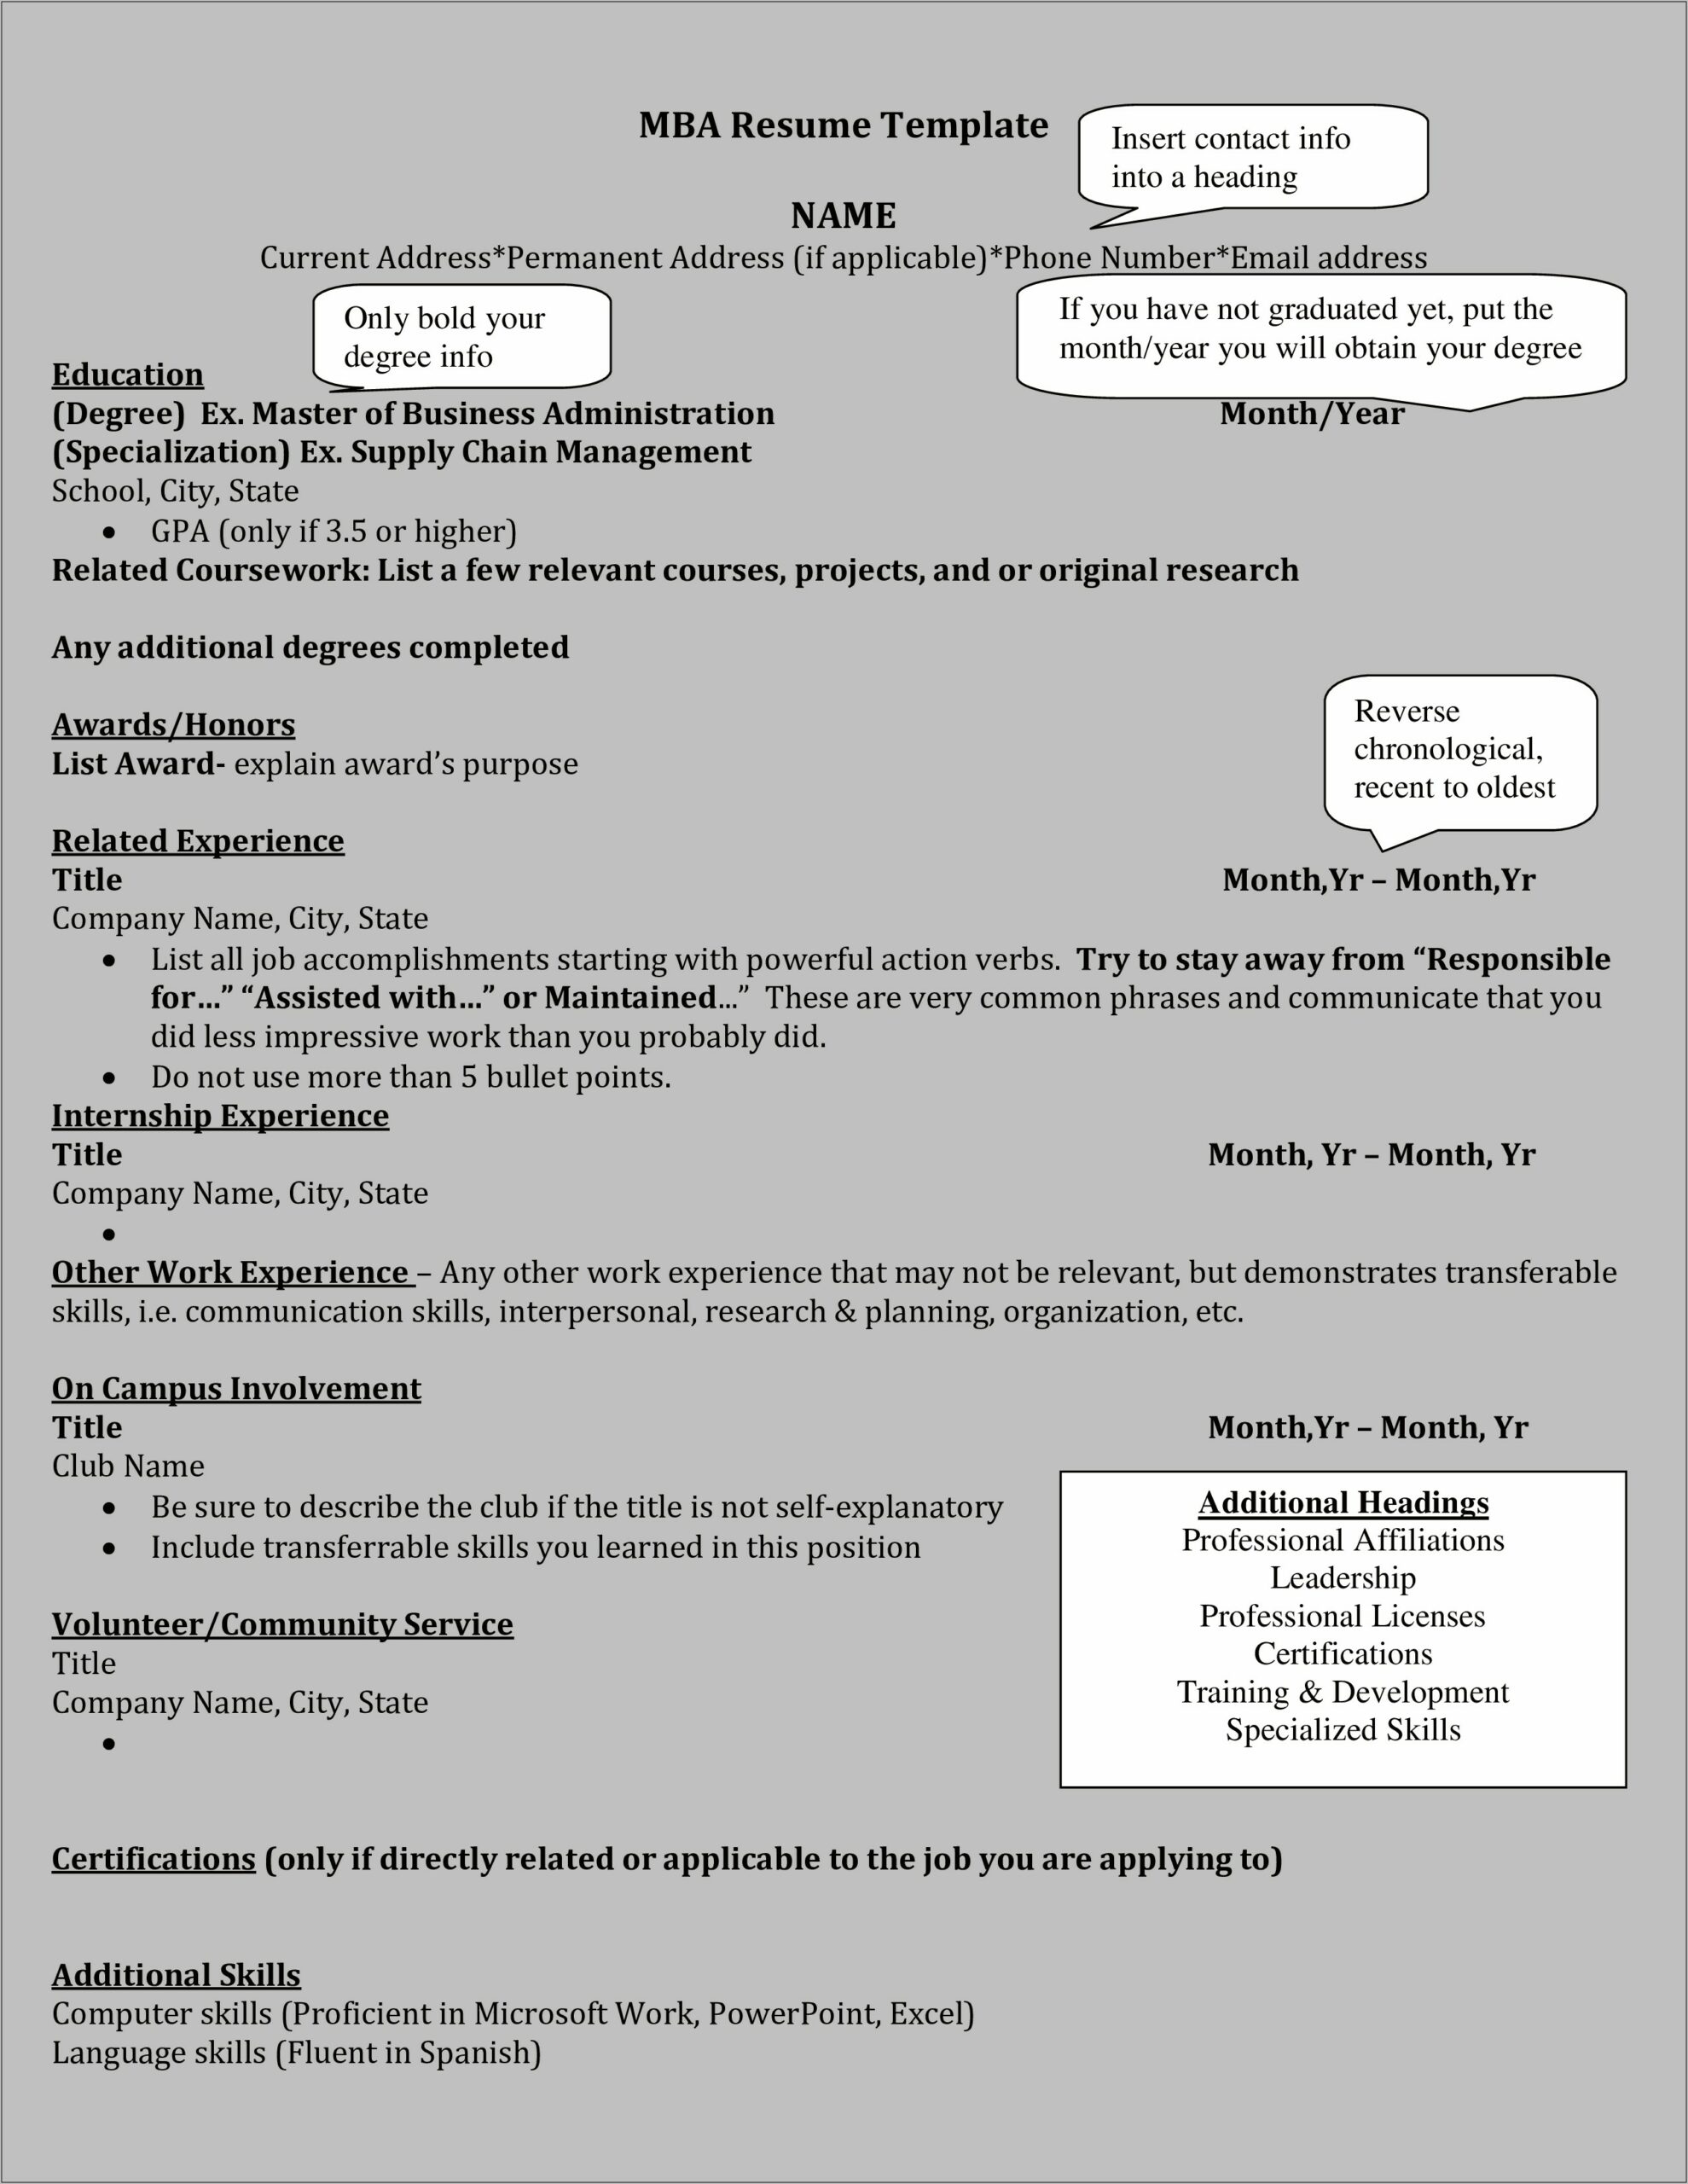 Resume Examples For Mba Finance Freshers